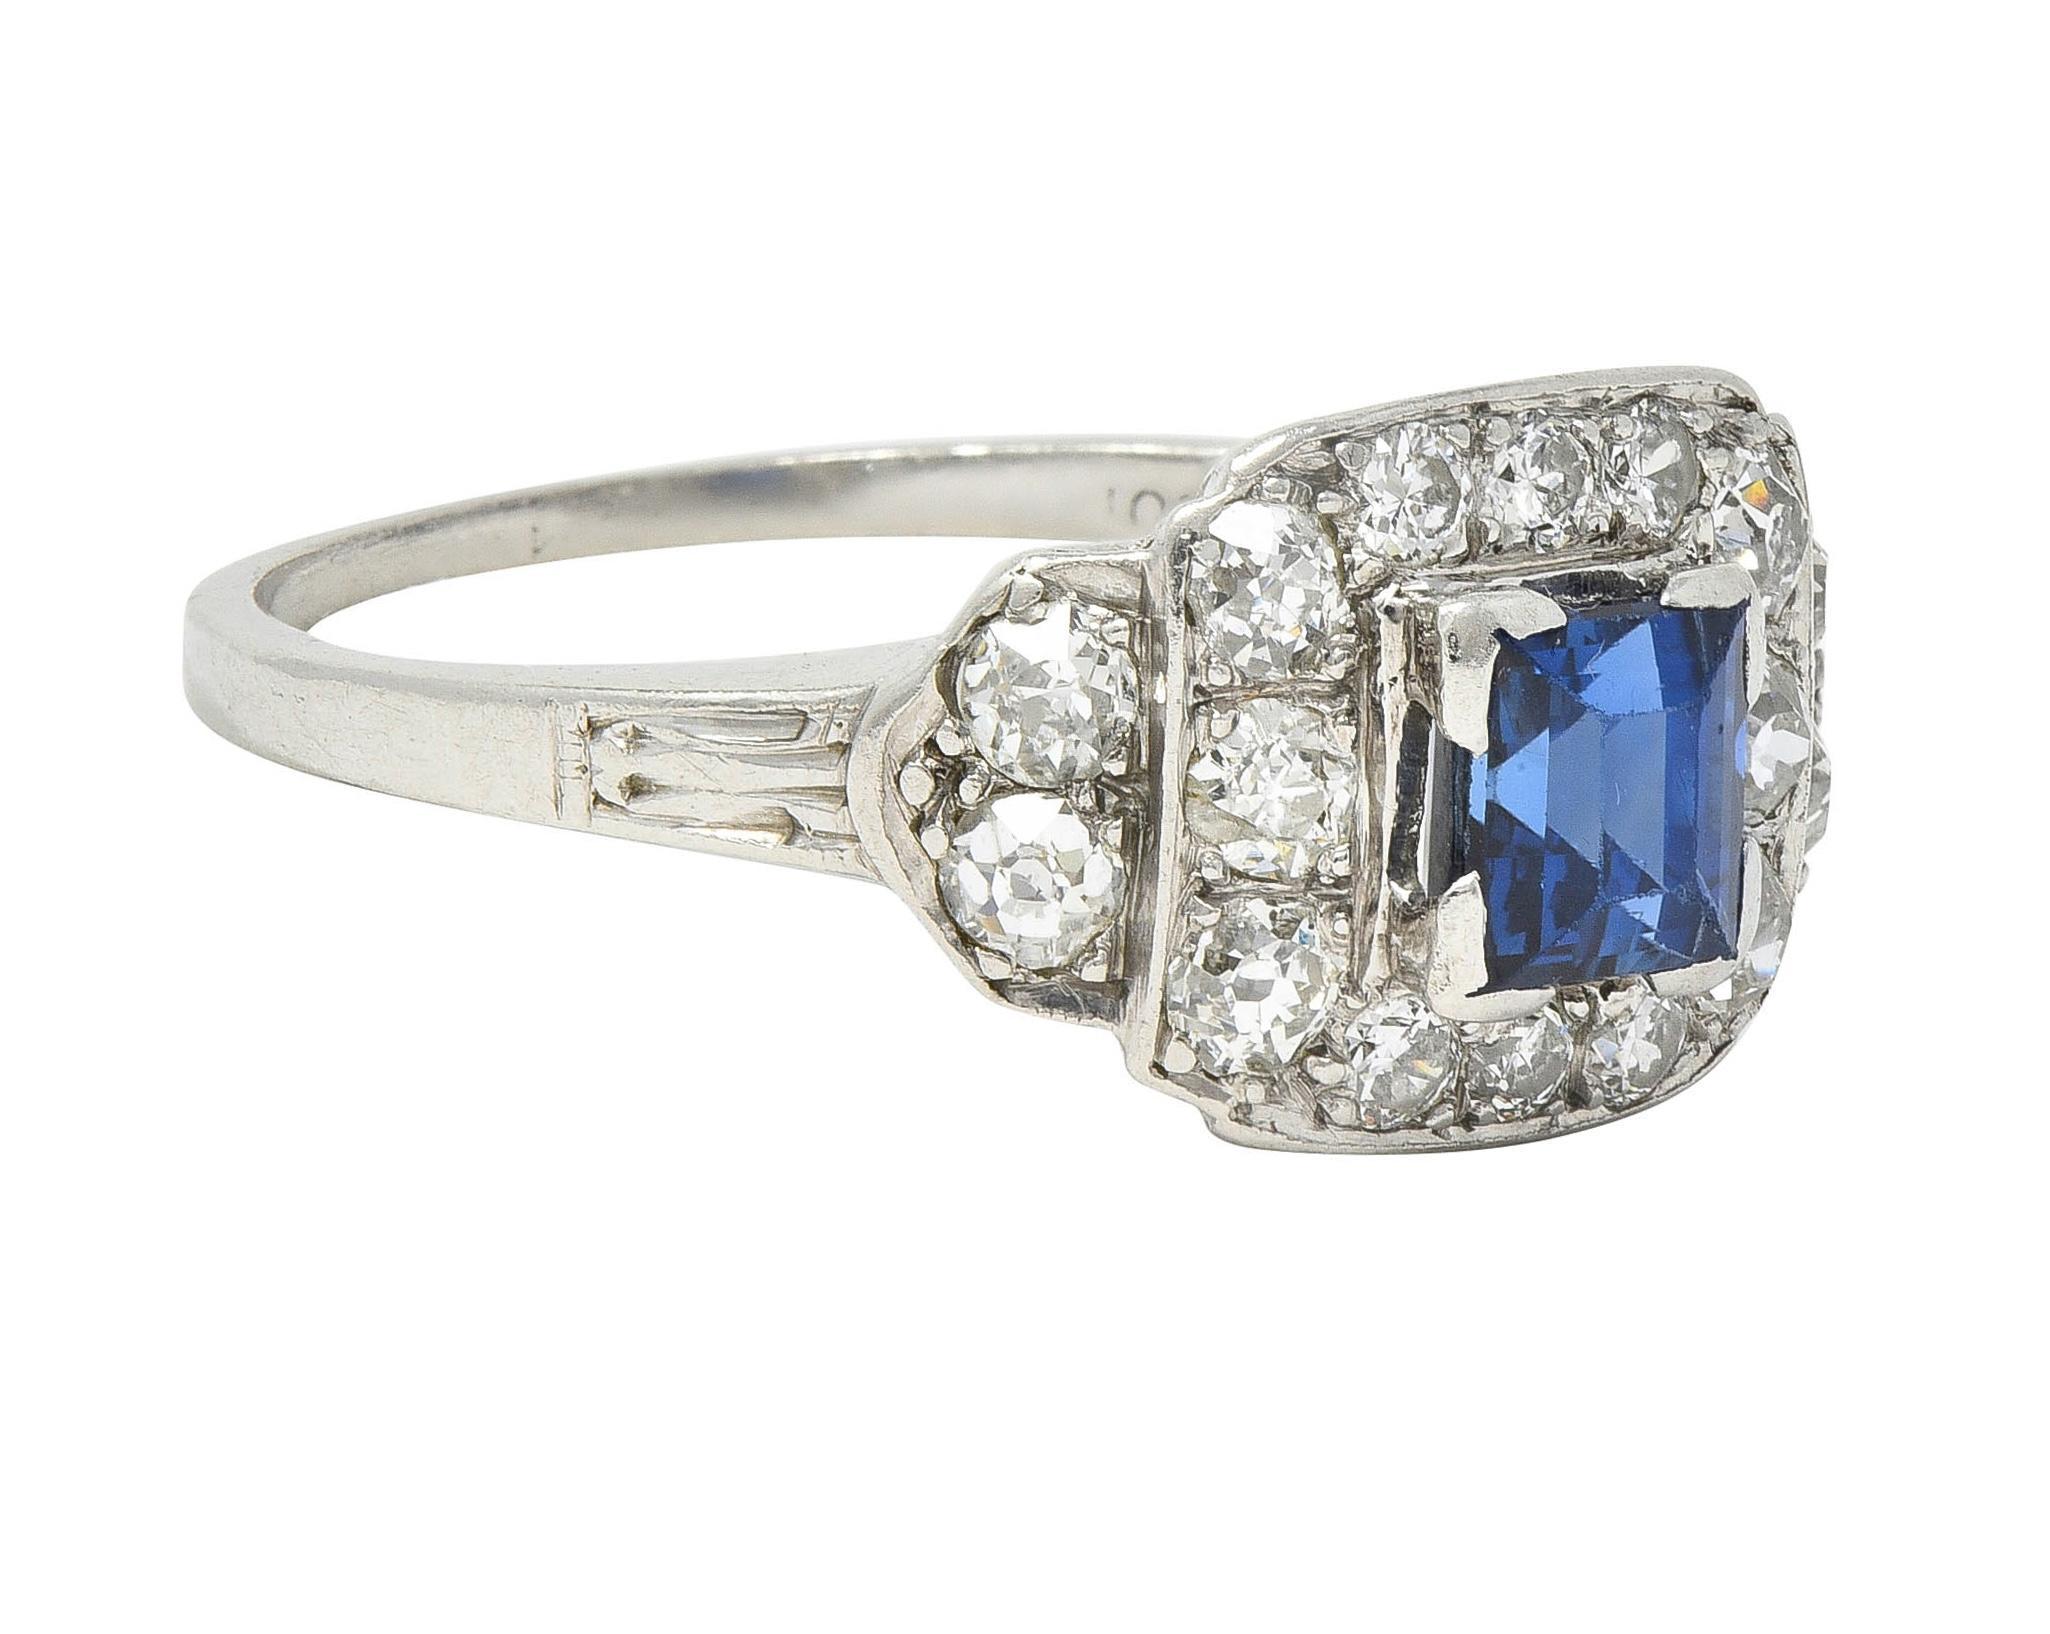 Centering a square step-cut sapphire weighing approximately 0.74 carat 
Transparent medium blue - set in a raised square semi-bezel 
With a clustered surround of old European cut diamonds
Weighing approximately 0.64 carat total 
H color with VS2